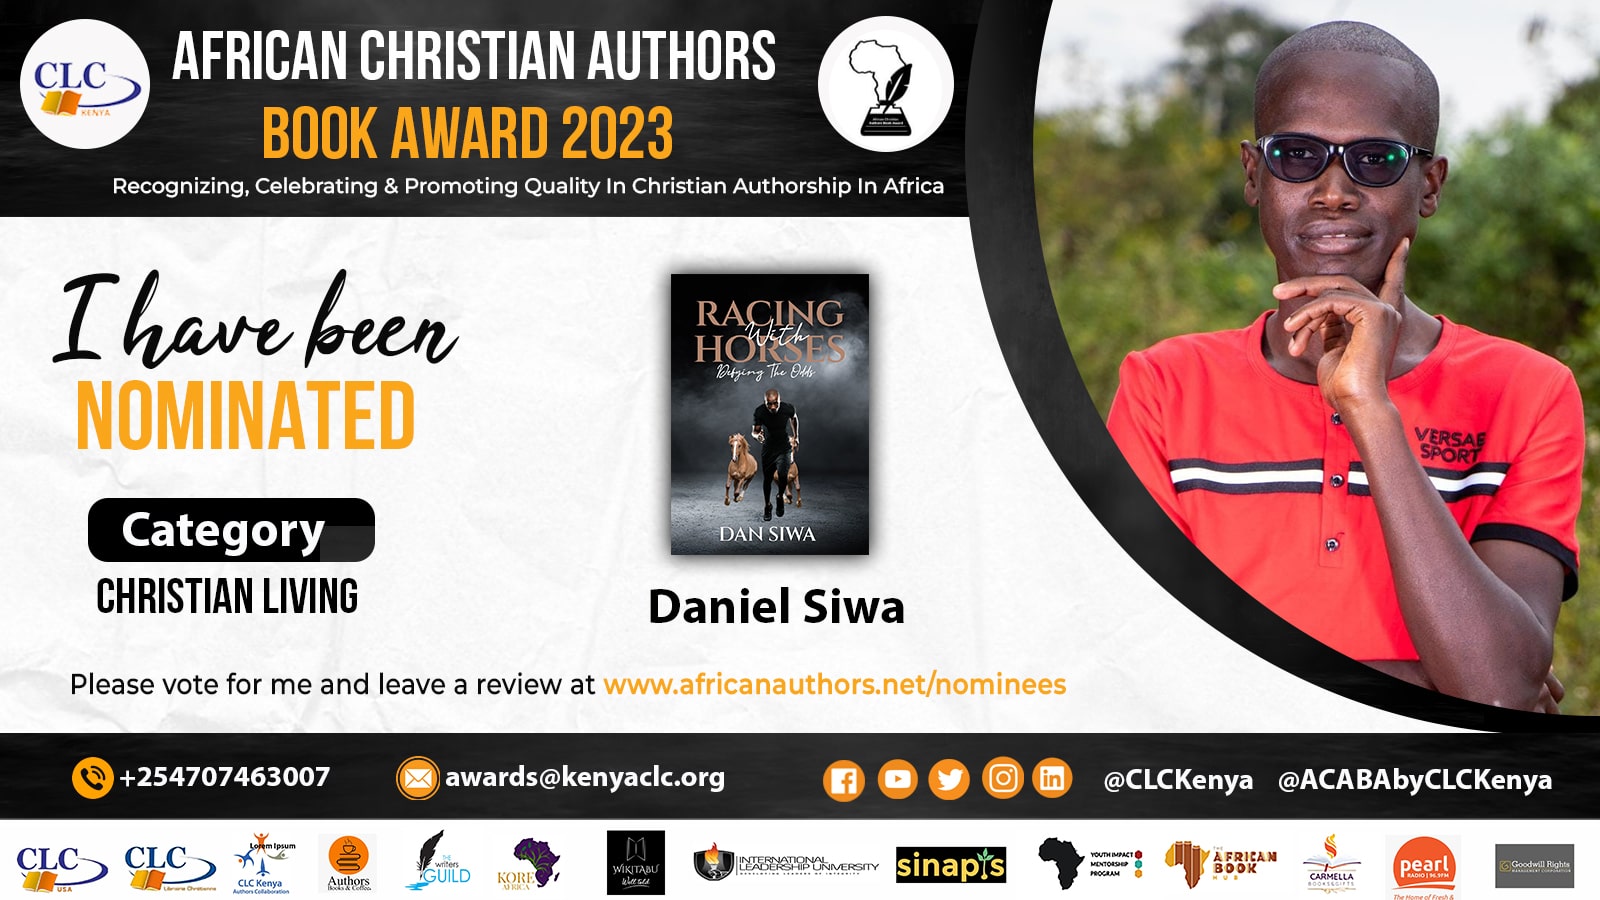 Dan Siwa Narrates Of The Painful Place From Where His Book Was Birthed